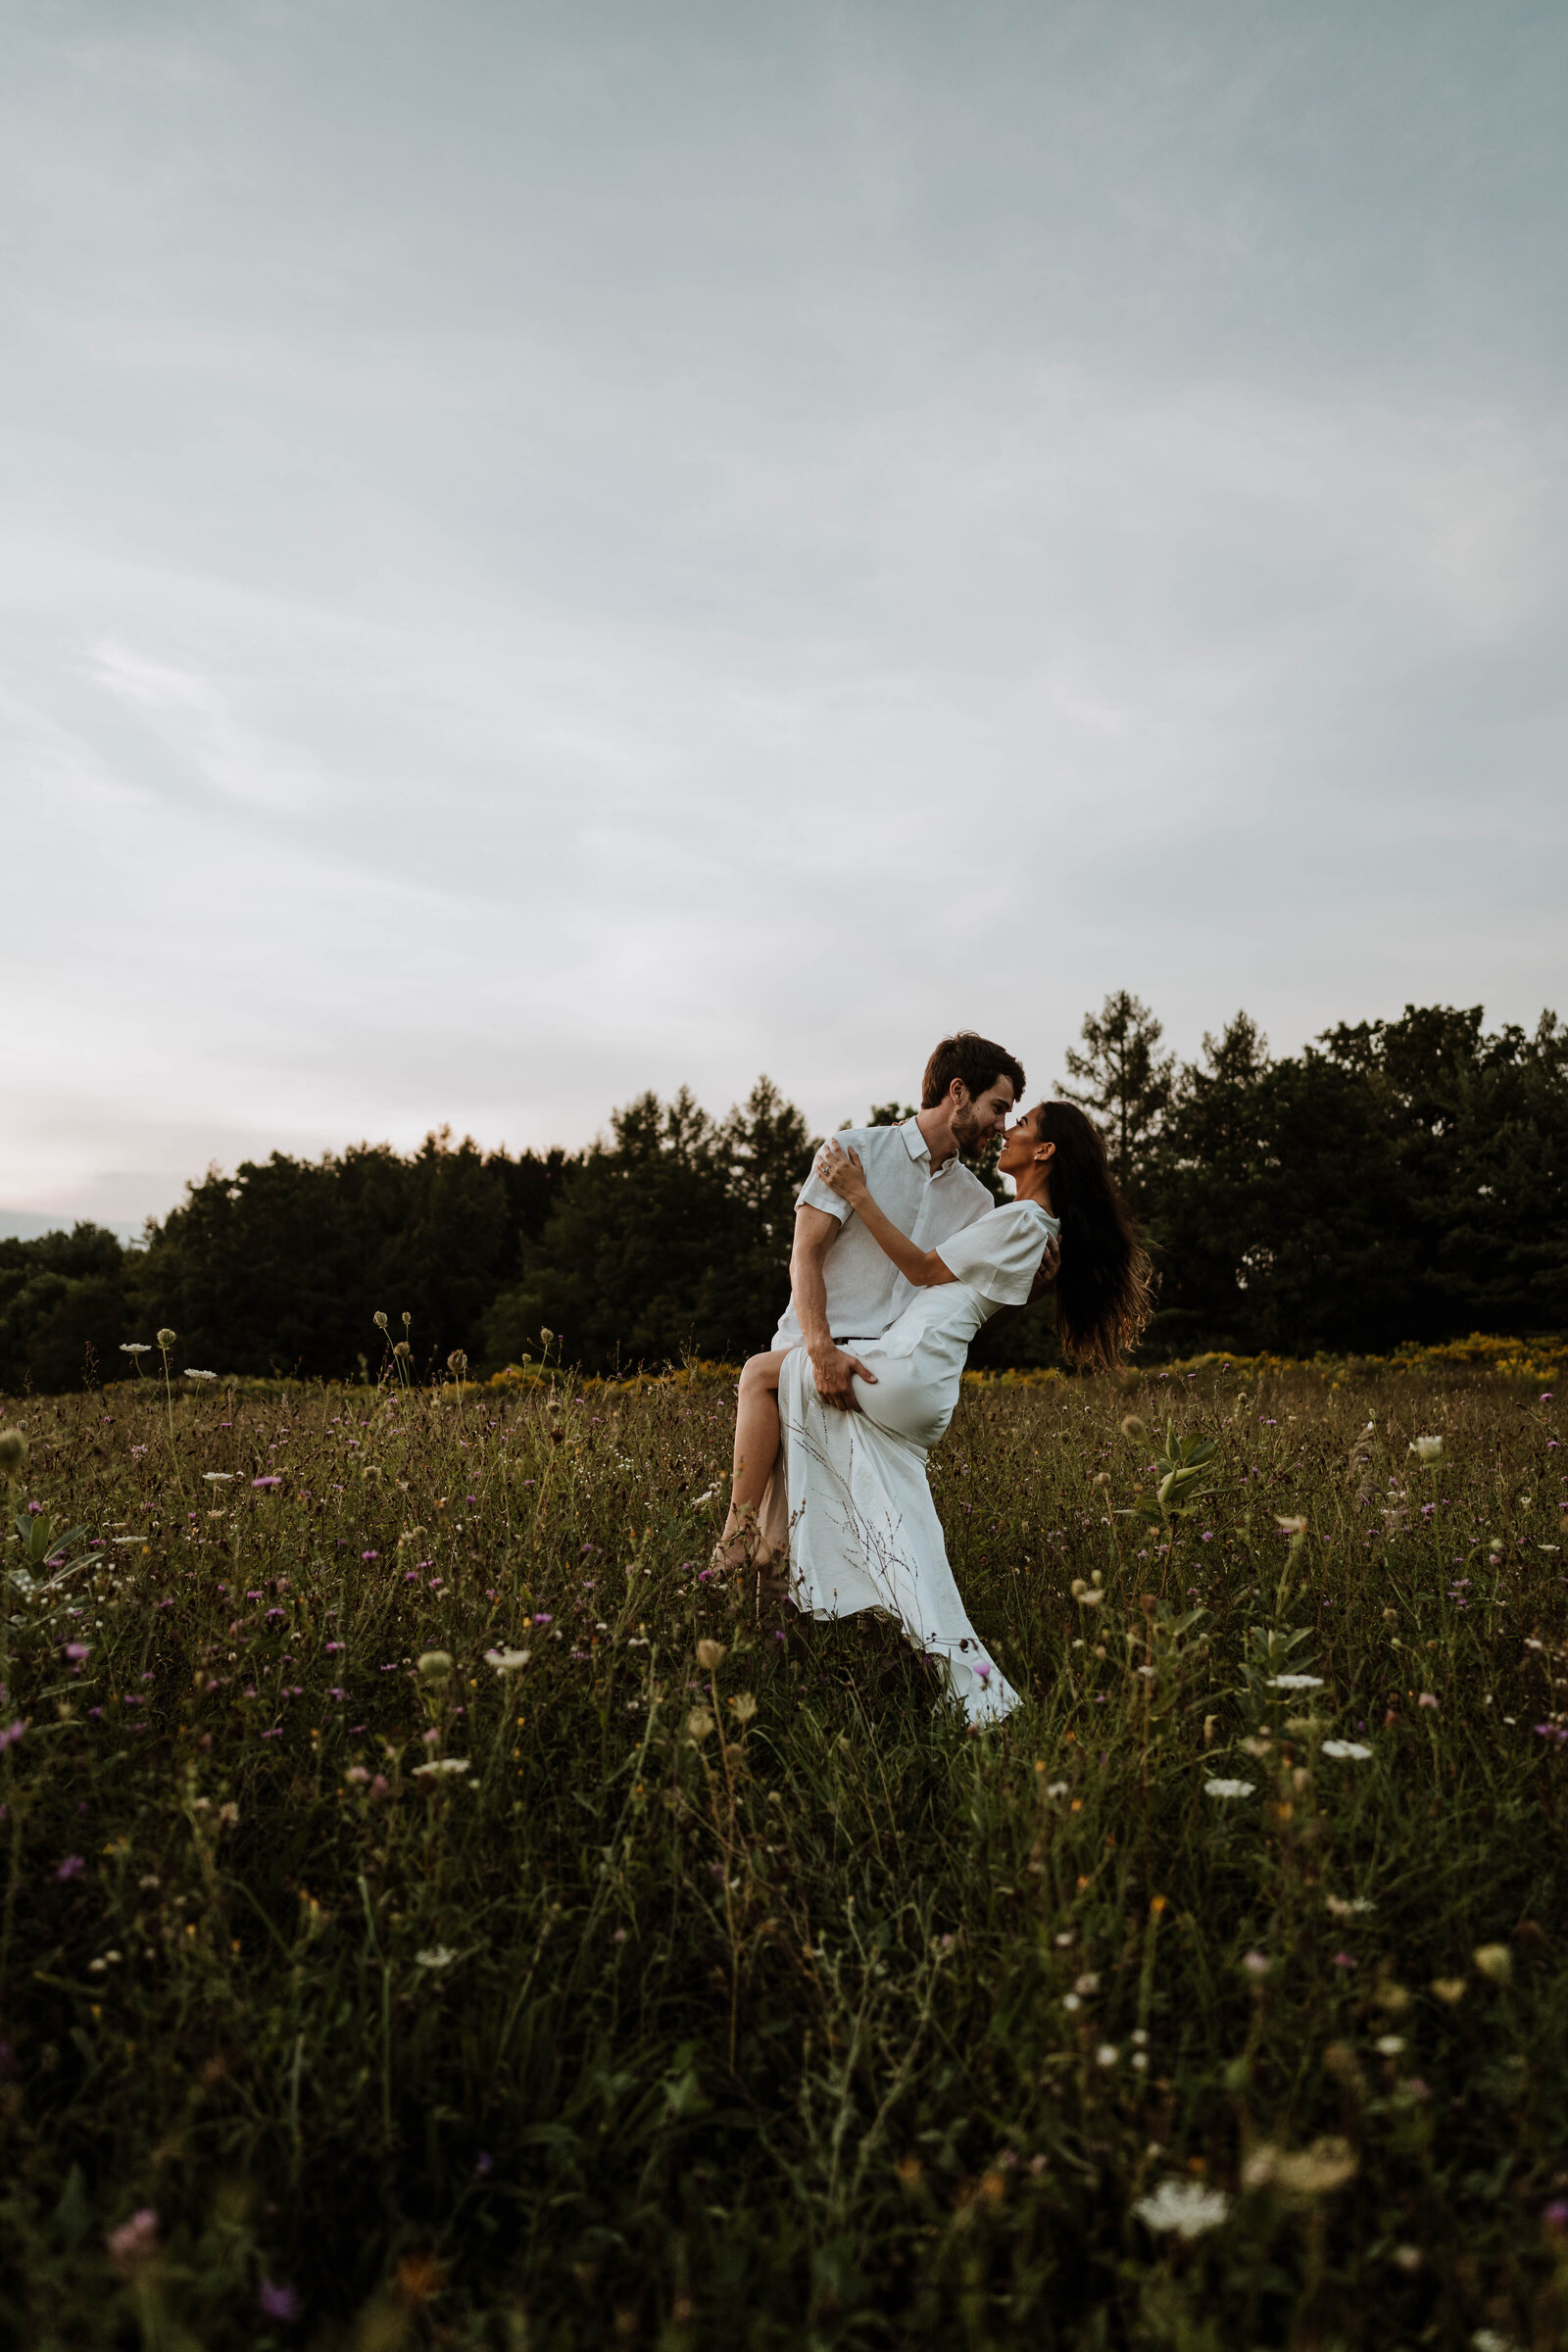 Newly eloped couple dancing in a field.